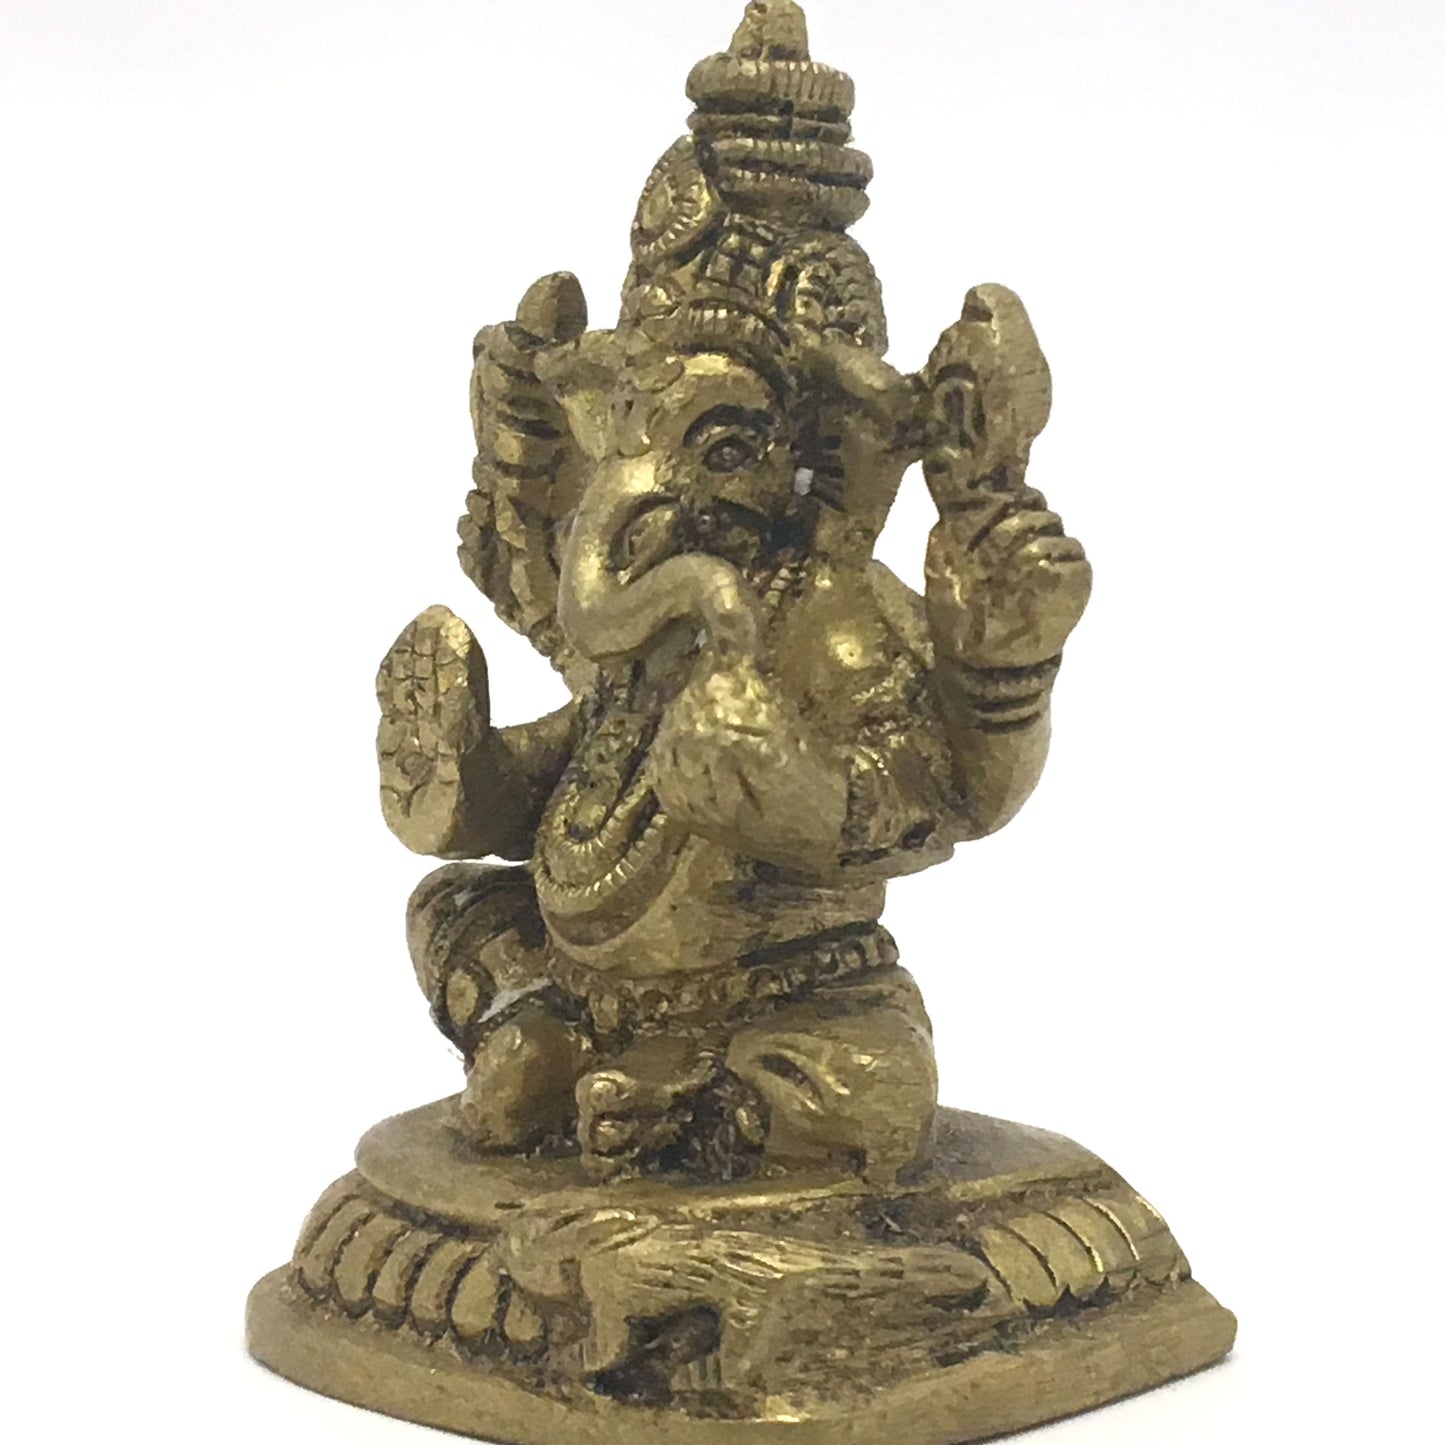 Handcrafted Detailed Brass Ganesh India Elephant God Statue– Obstacle Remover 2.